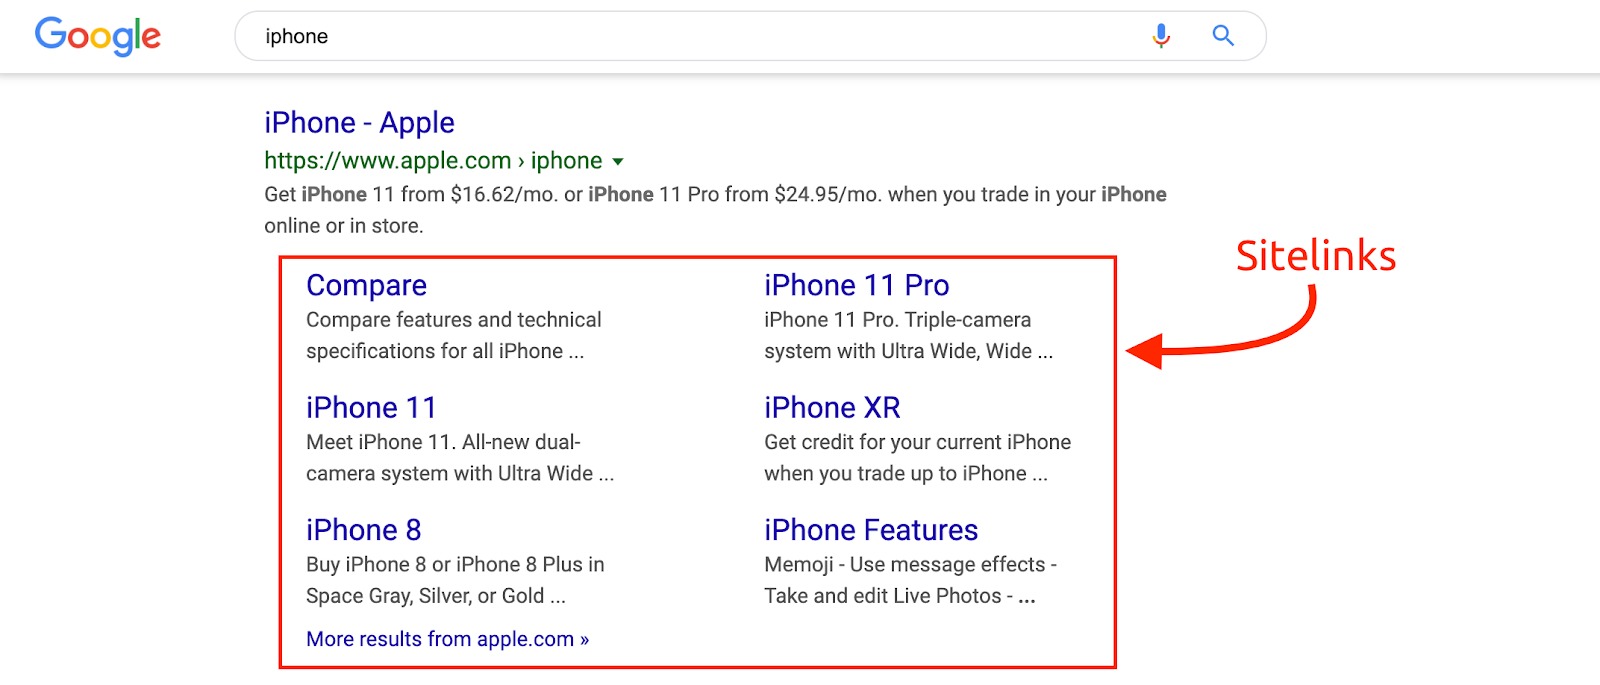 Example of what sitelinks look like in Google Search results. Three sitelinks that showed up for an iPhone website are highlighted; an arrow with the "Sitelinks" text above it is pointing at them. 